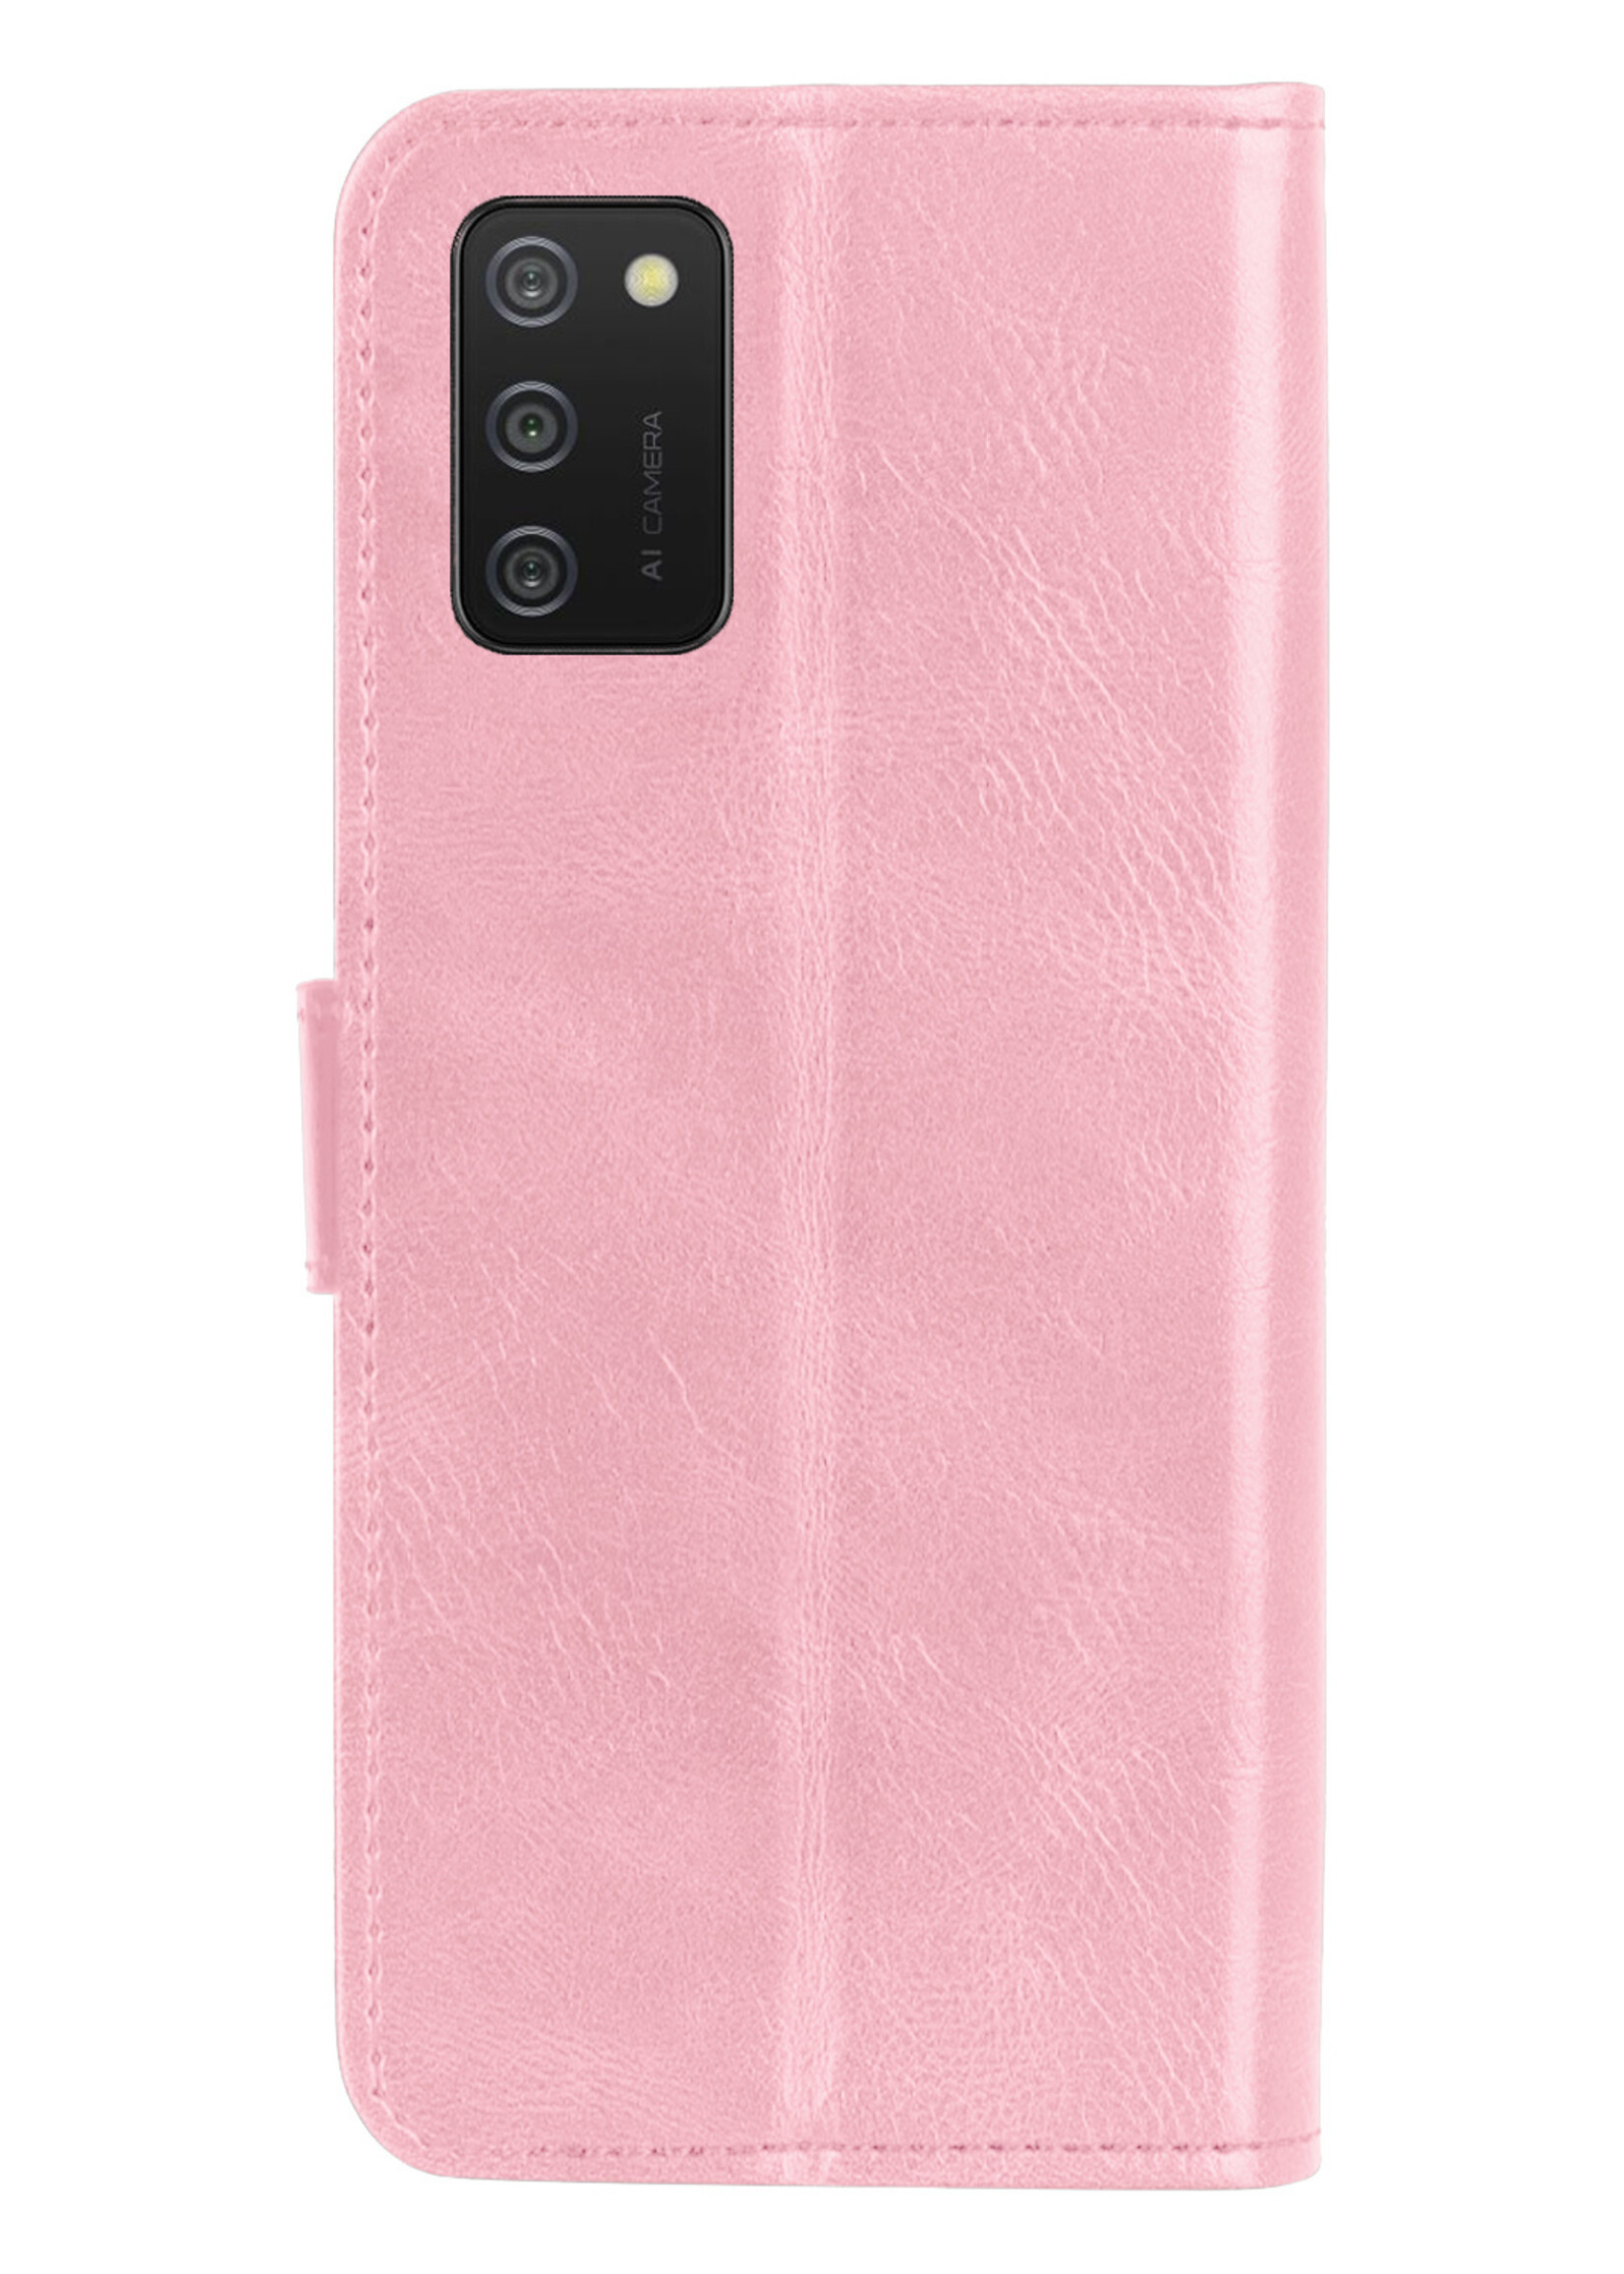 BTH Samsung A02s Hoesje Book Case Hoes - Samsung Galaxy A02s Case Hoesje Portemonnee Cover - Samsung A02s Hoes Wallet Case Hoesje - Licht Roze